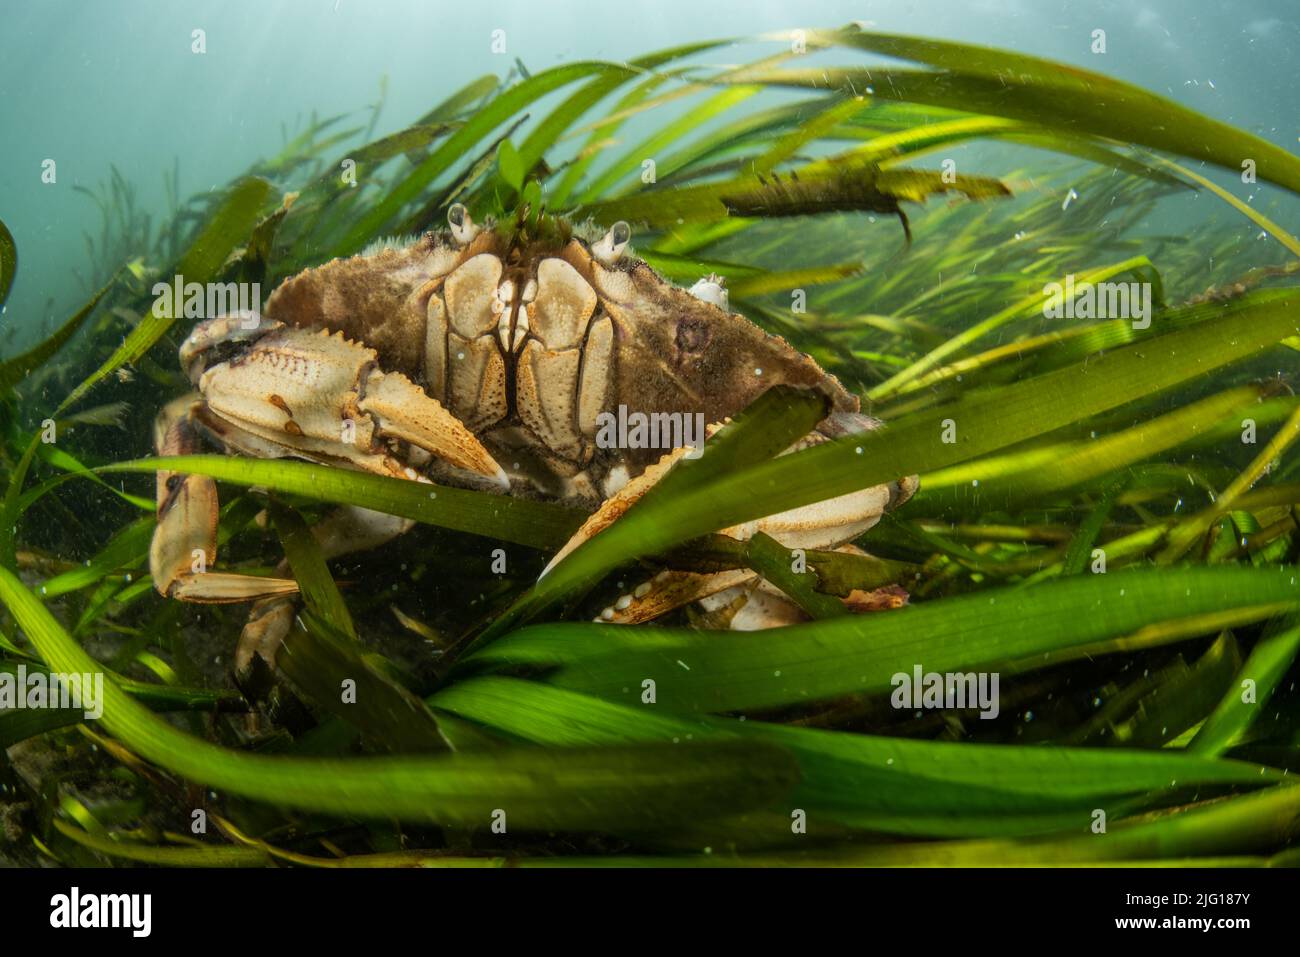 A large crab hides in eelgrass in an estuary in the Greater Farallones National marine sanctuary in California, USA/ Stock Photo